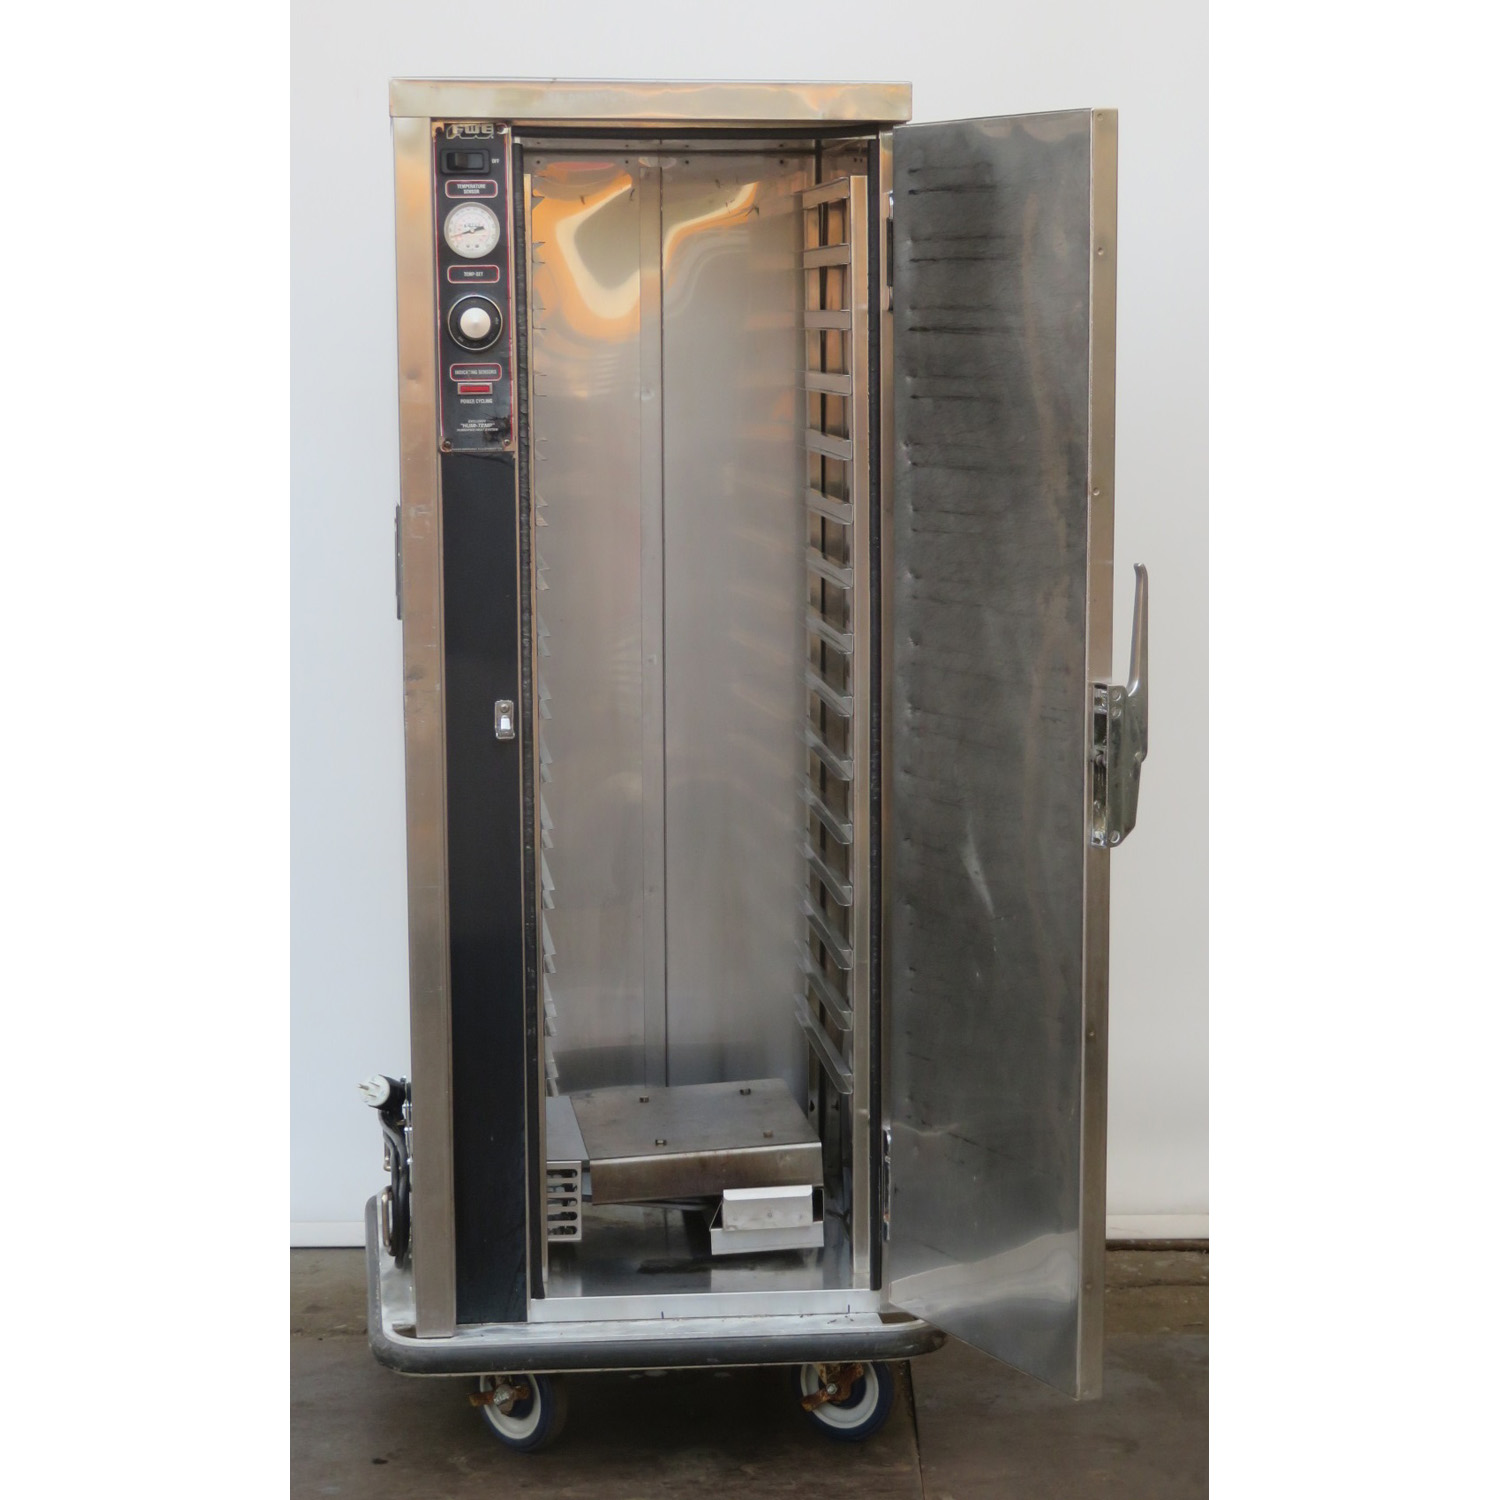 FWE PS-1220-15 Full Height Insulated Mobile Heated Cabinet, Used Excellent Condition image 2